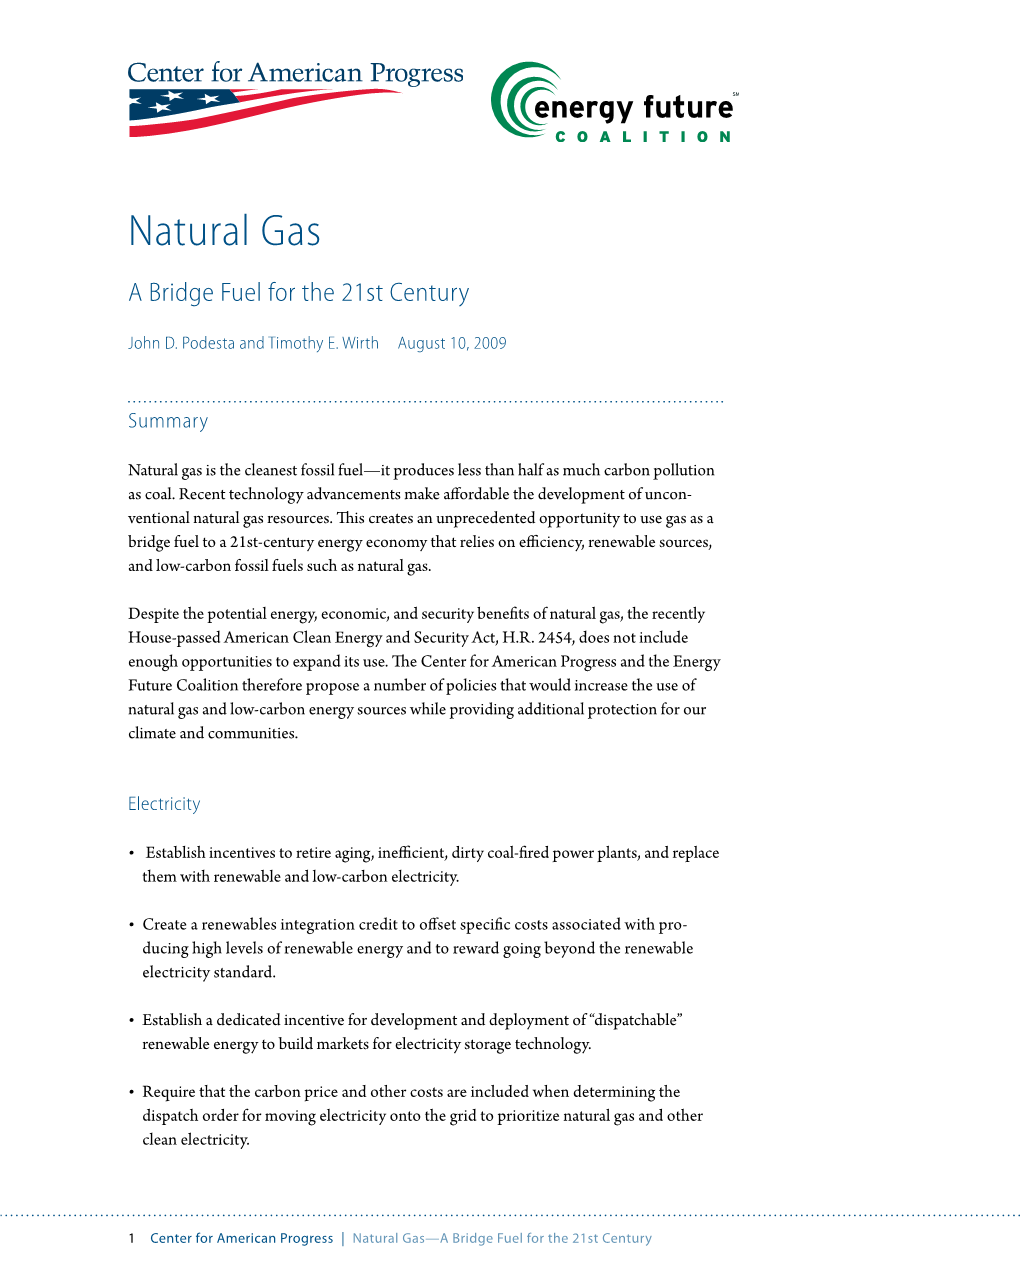 Natural Gas a Bridge Fuel for the 21St Century